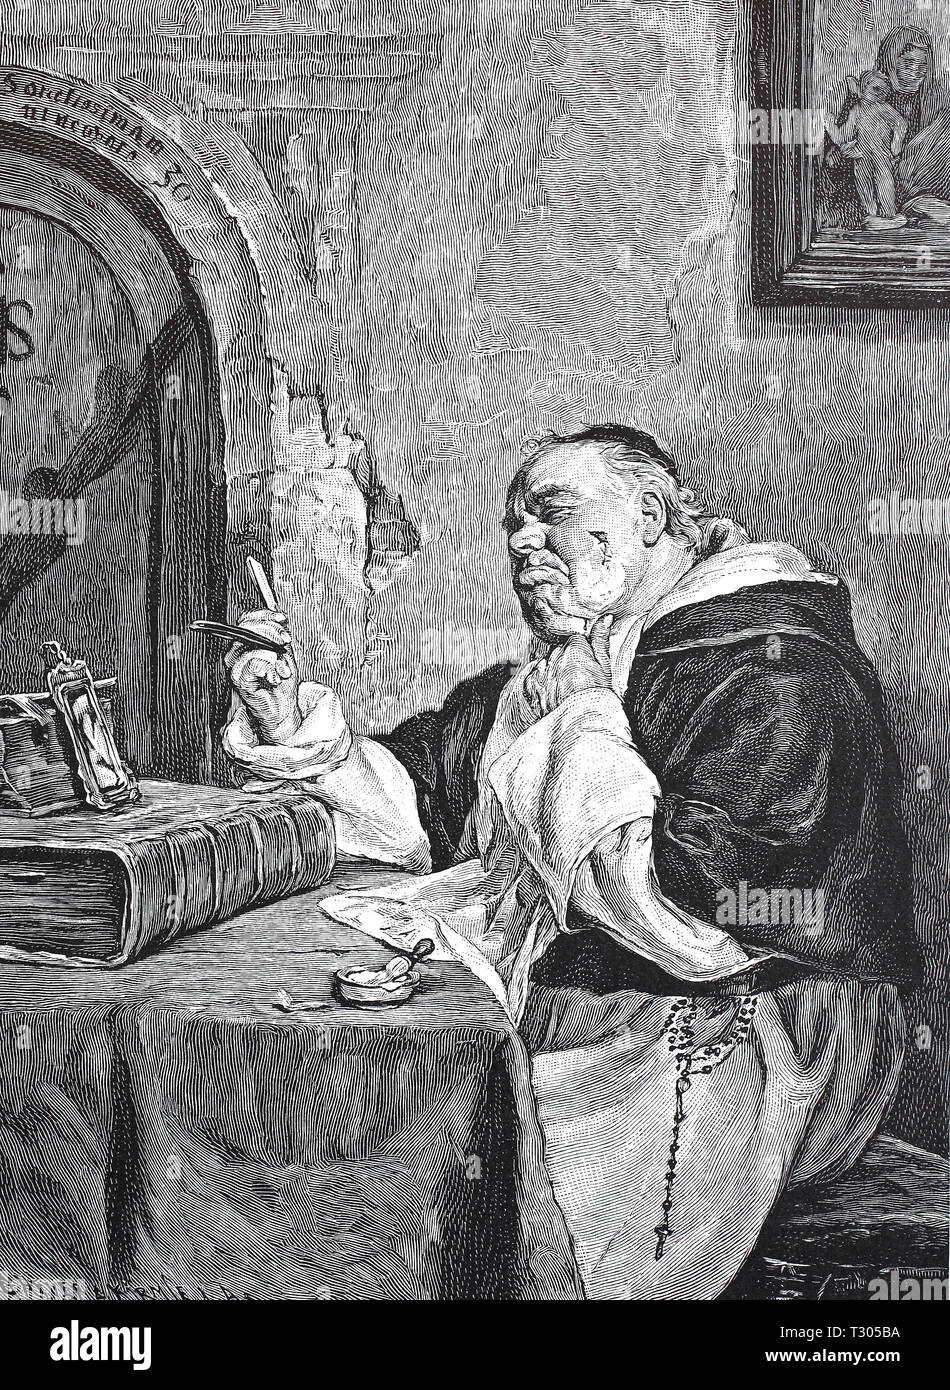 Digital improved reproduction, Priest has cut himself while shaving with the razor, Pfarrer hat sich beim Rasieren mit dem Rasiermesser geschnitten, from an original print from the 19th century Stock Photo